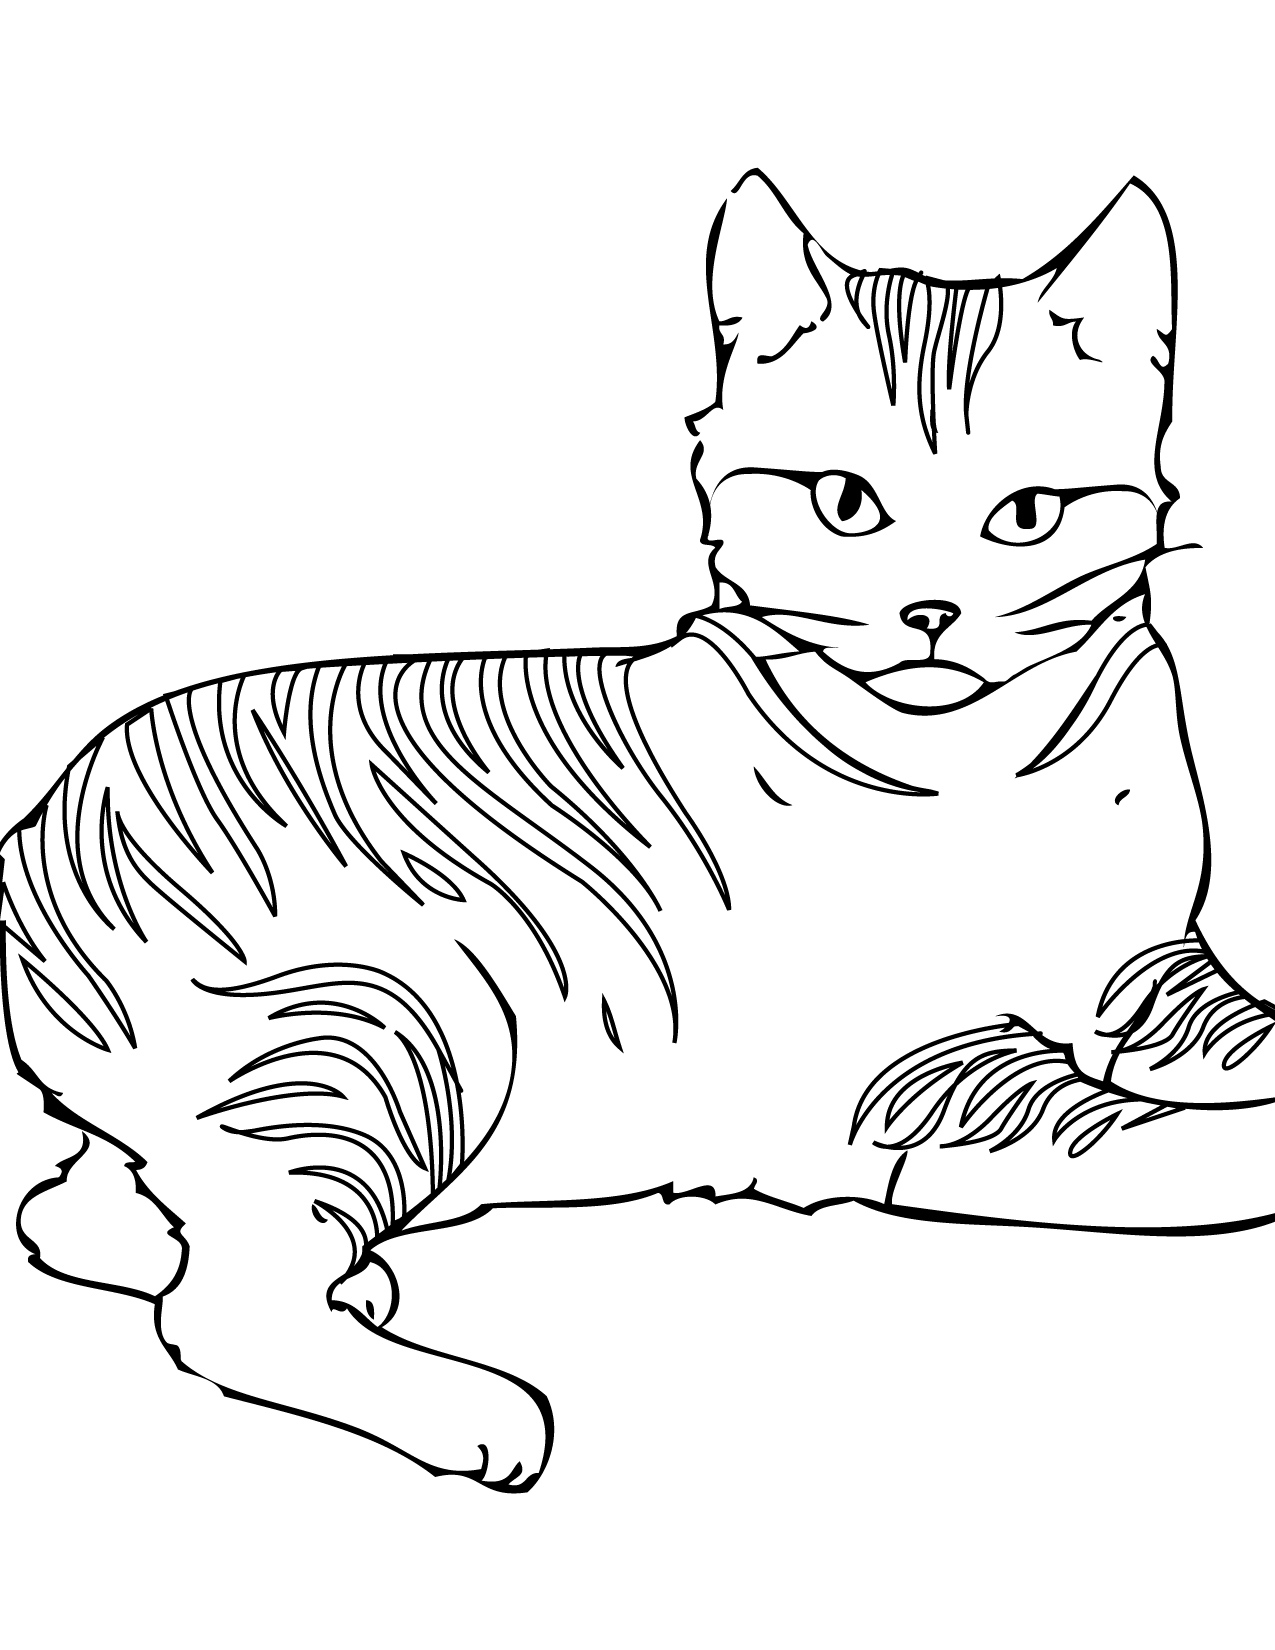 Free Printable Pictures Of Cats To Color